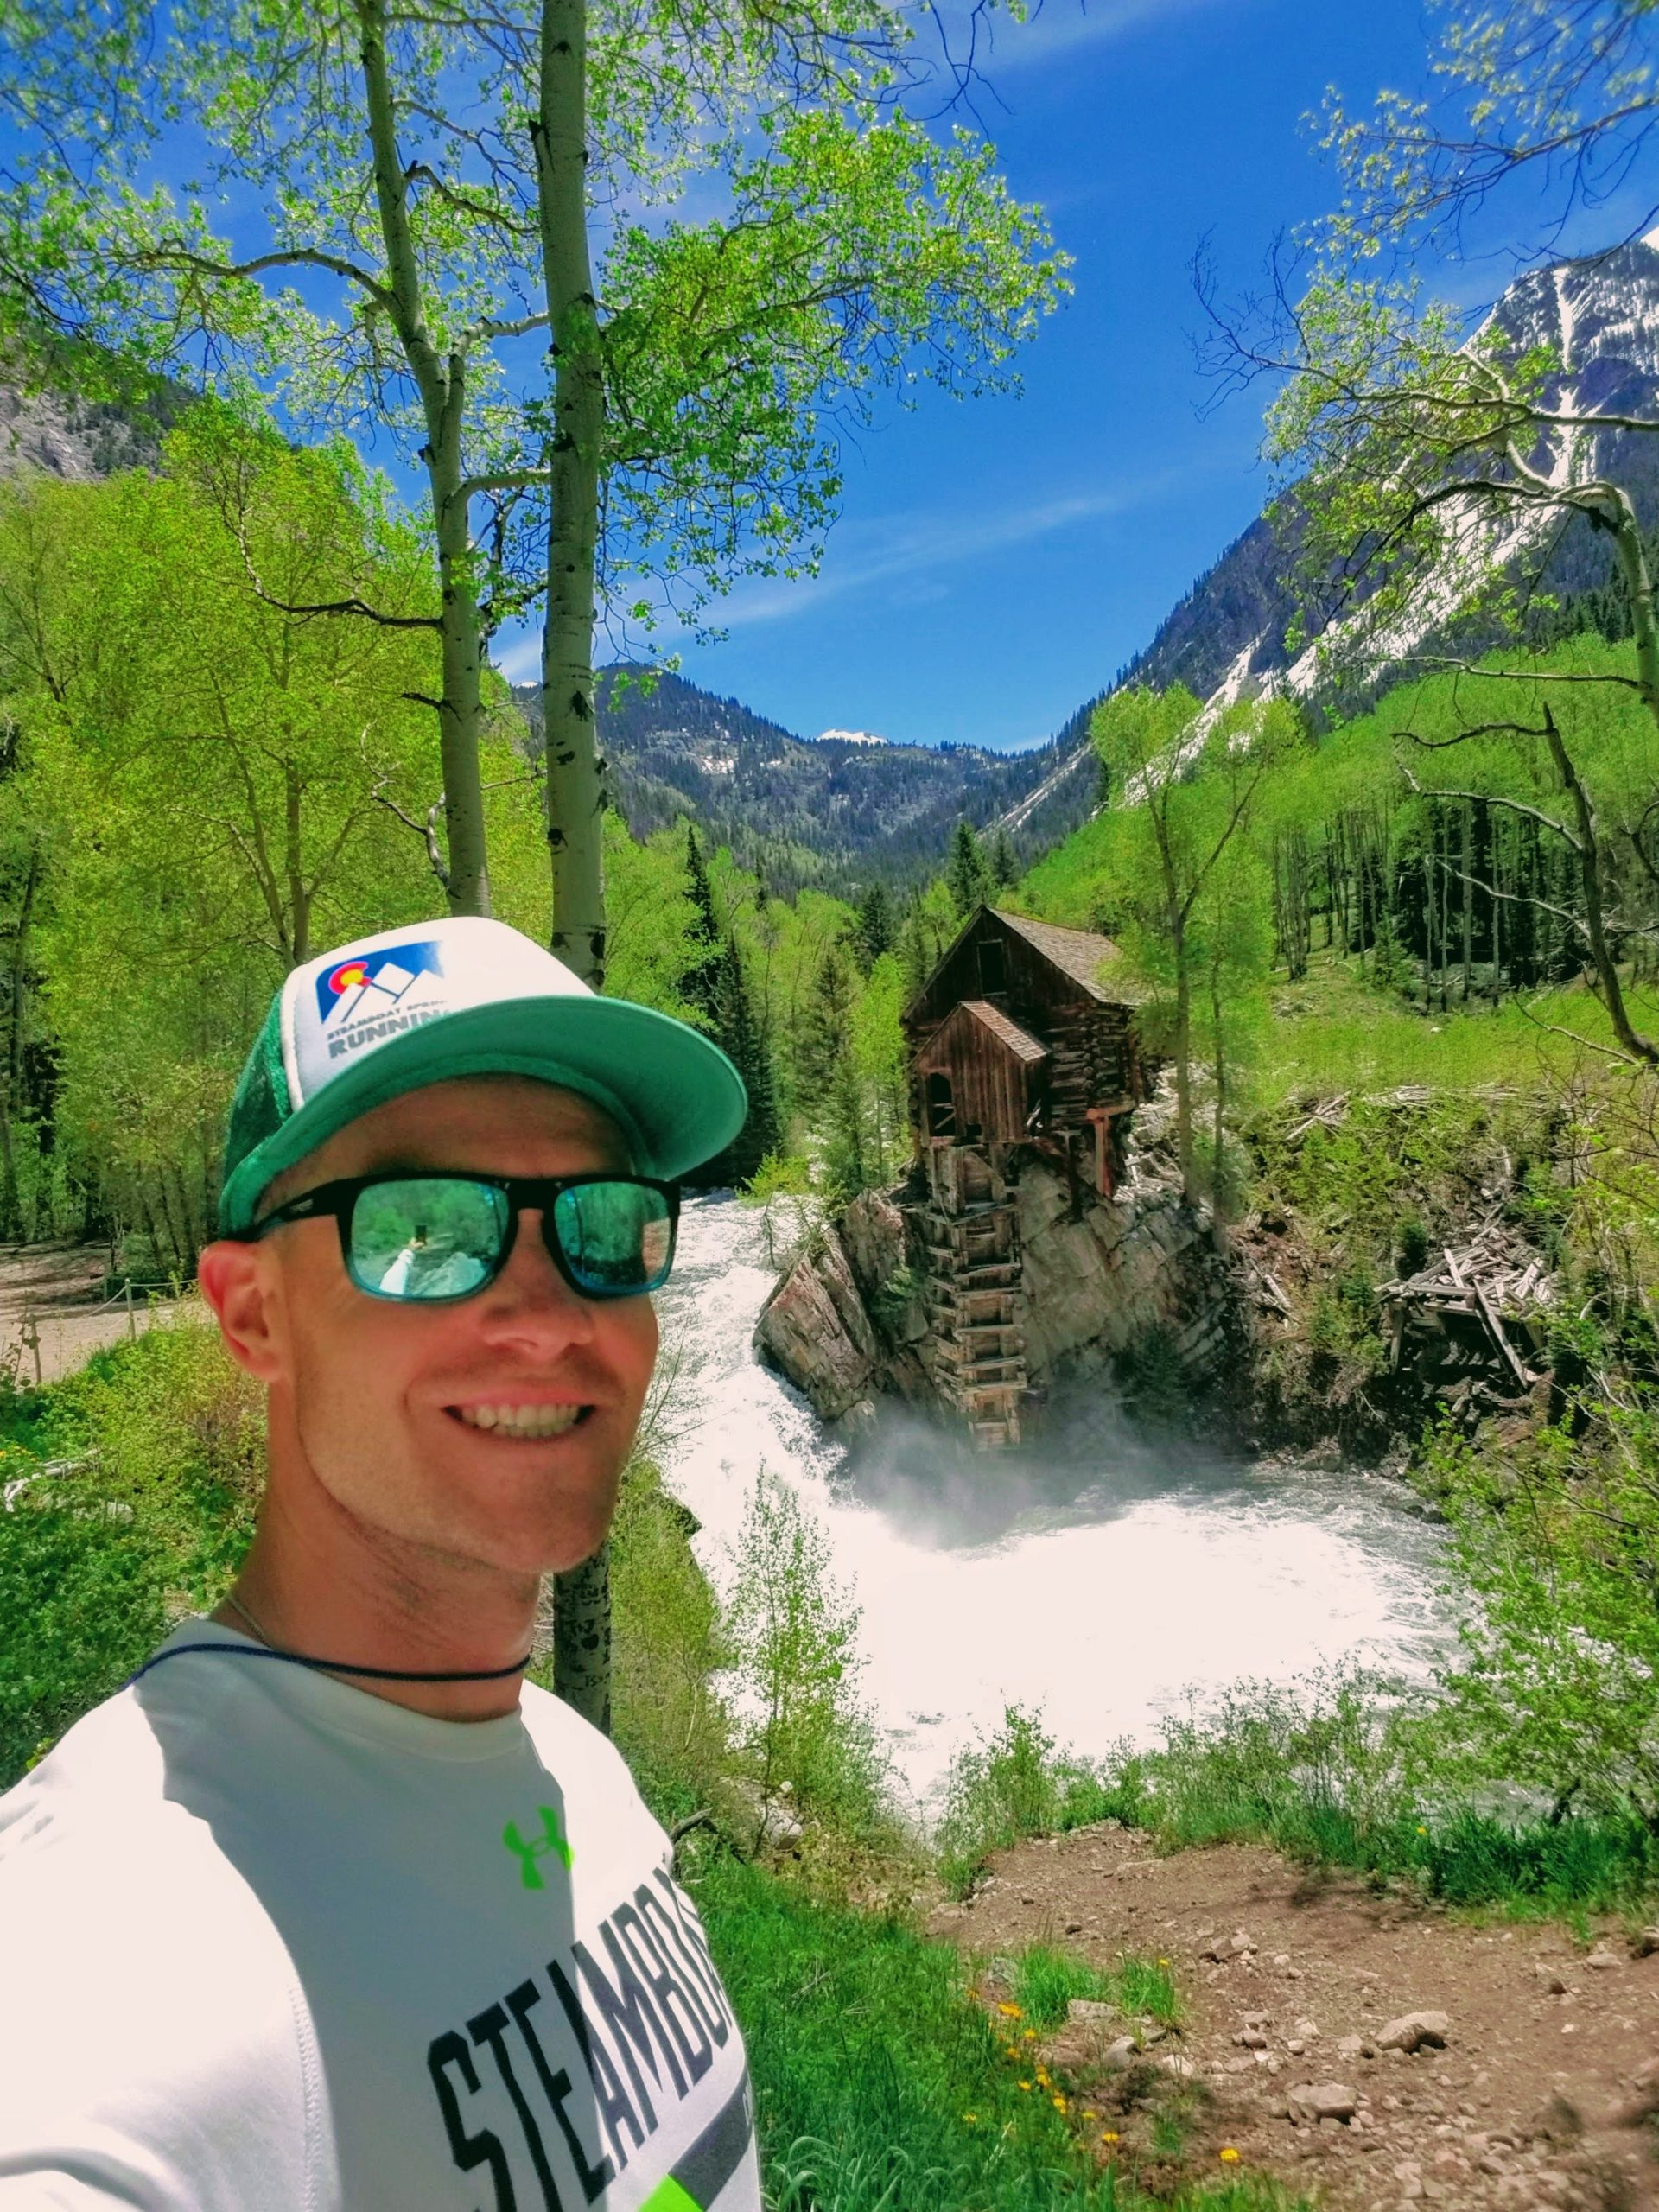 Me, taking a selfie in front of the river that flows in front of Crystal Mill
